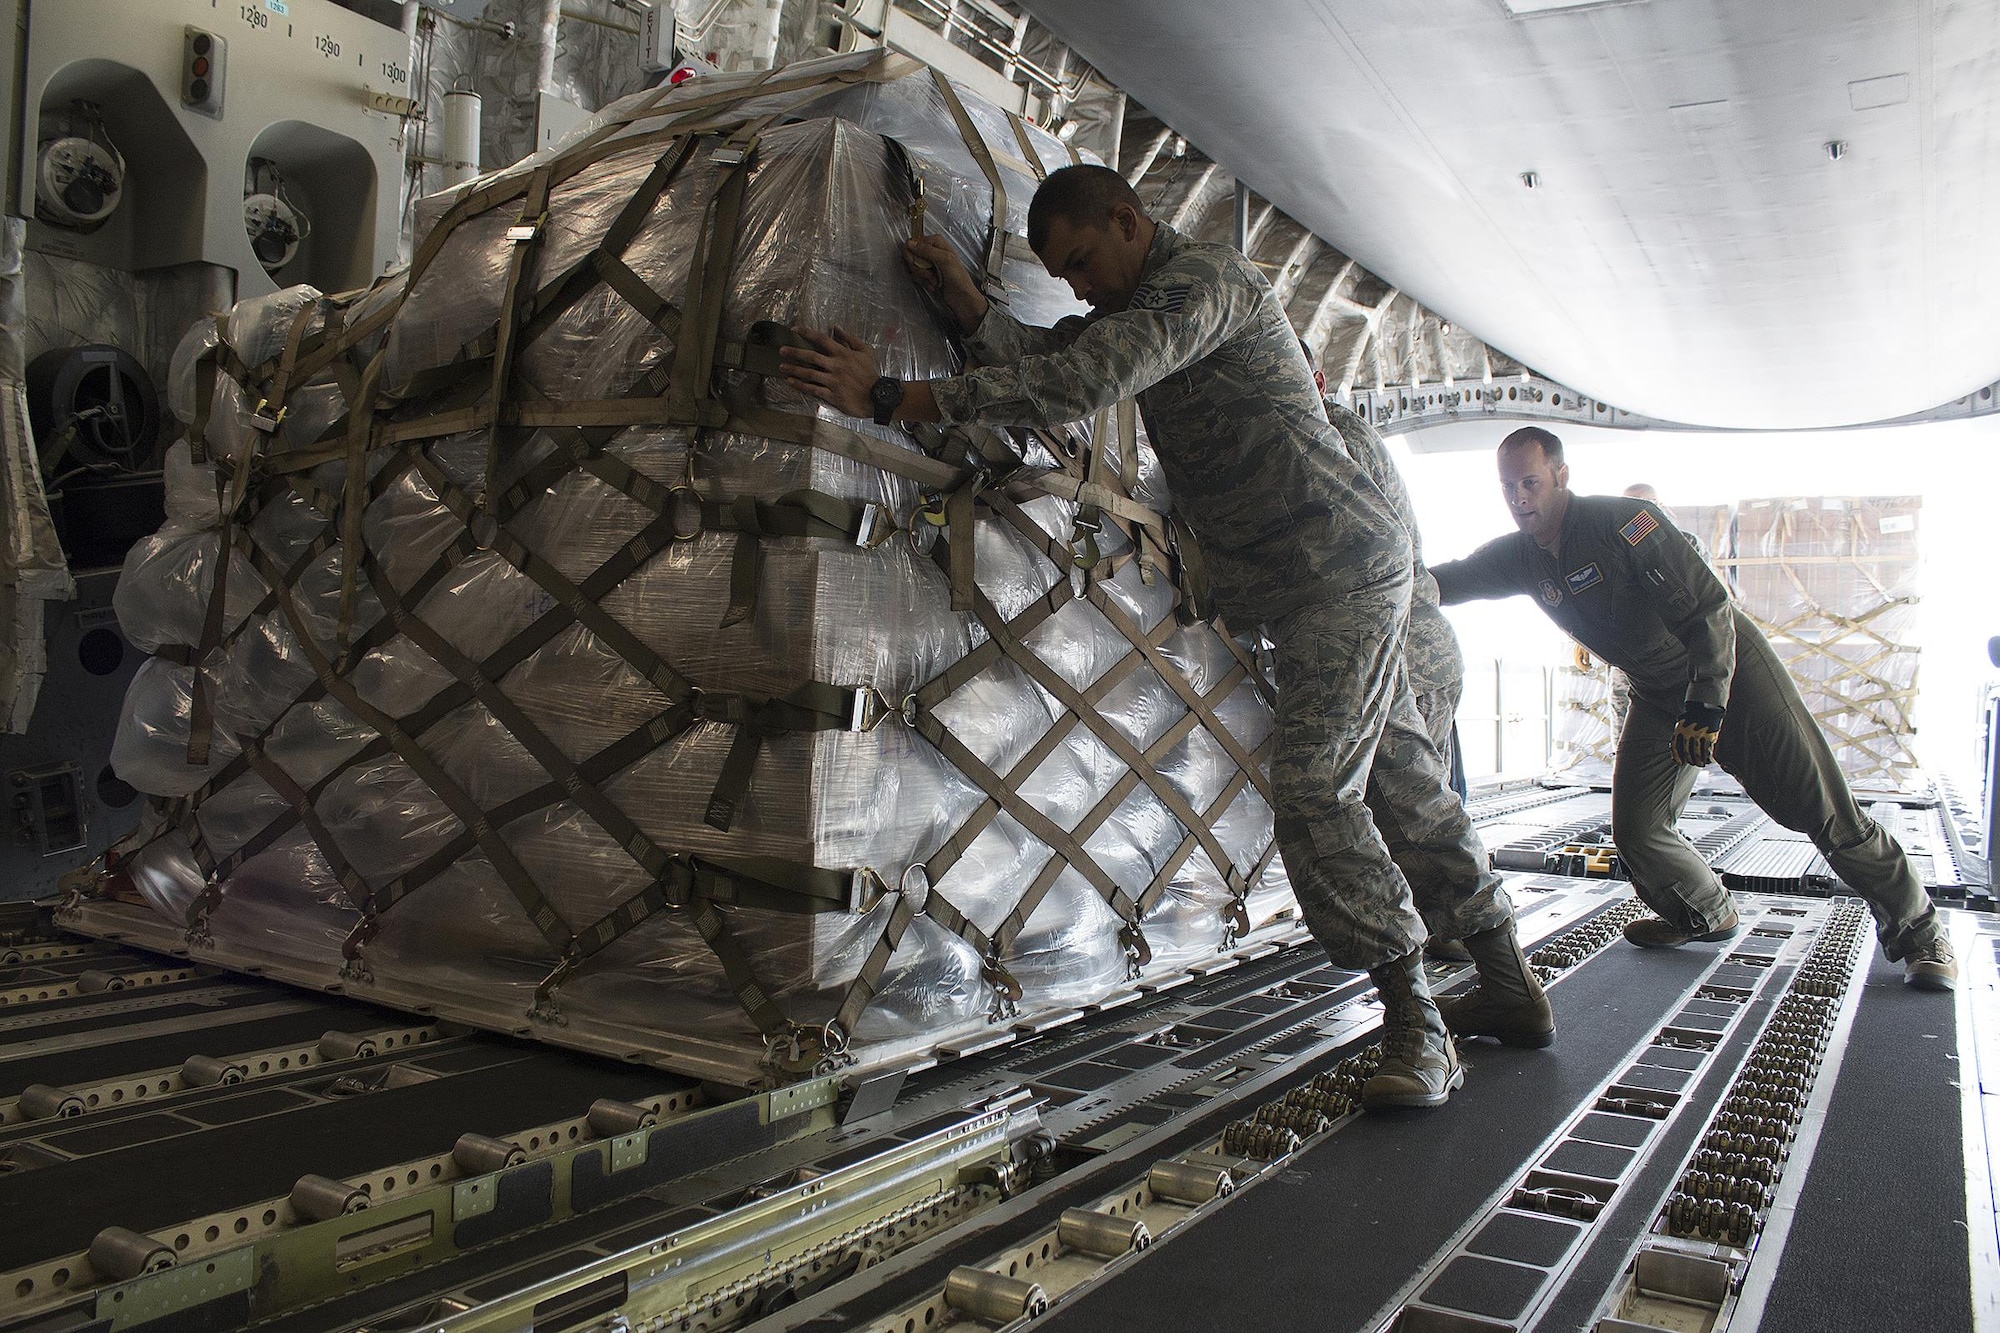 Tech. Sgt. Bryan Ulloa, 445th Force Support Squadron Services Flight services manager, helps Tech. Sgt. Andrew Wagner, 89th Airlift Squadron loadmaster, load cargo on board a 445th Airlift Wing C-17 Globemaster III Monday. Four Airmen from the 445th FSS flew with the cargo that included a pallet of meals ready to eat, a pallet of water and one ISU 90 loaded with cots bound for Homestead Air Reserve Base, Florida. (U.S. Air Force photo/Master Sgt. Patrick O’Reilly